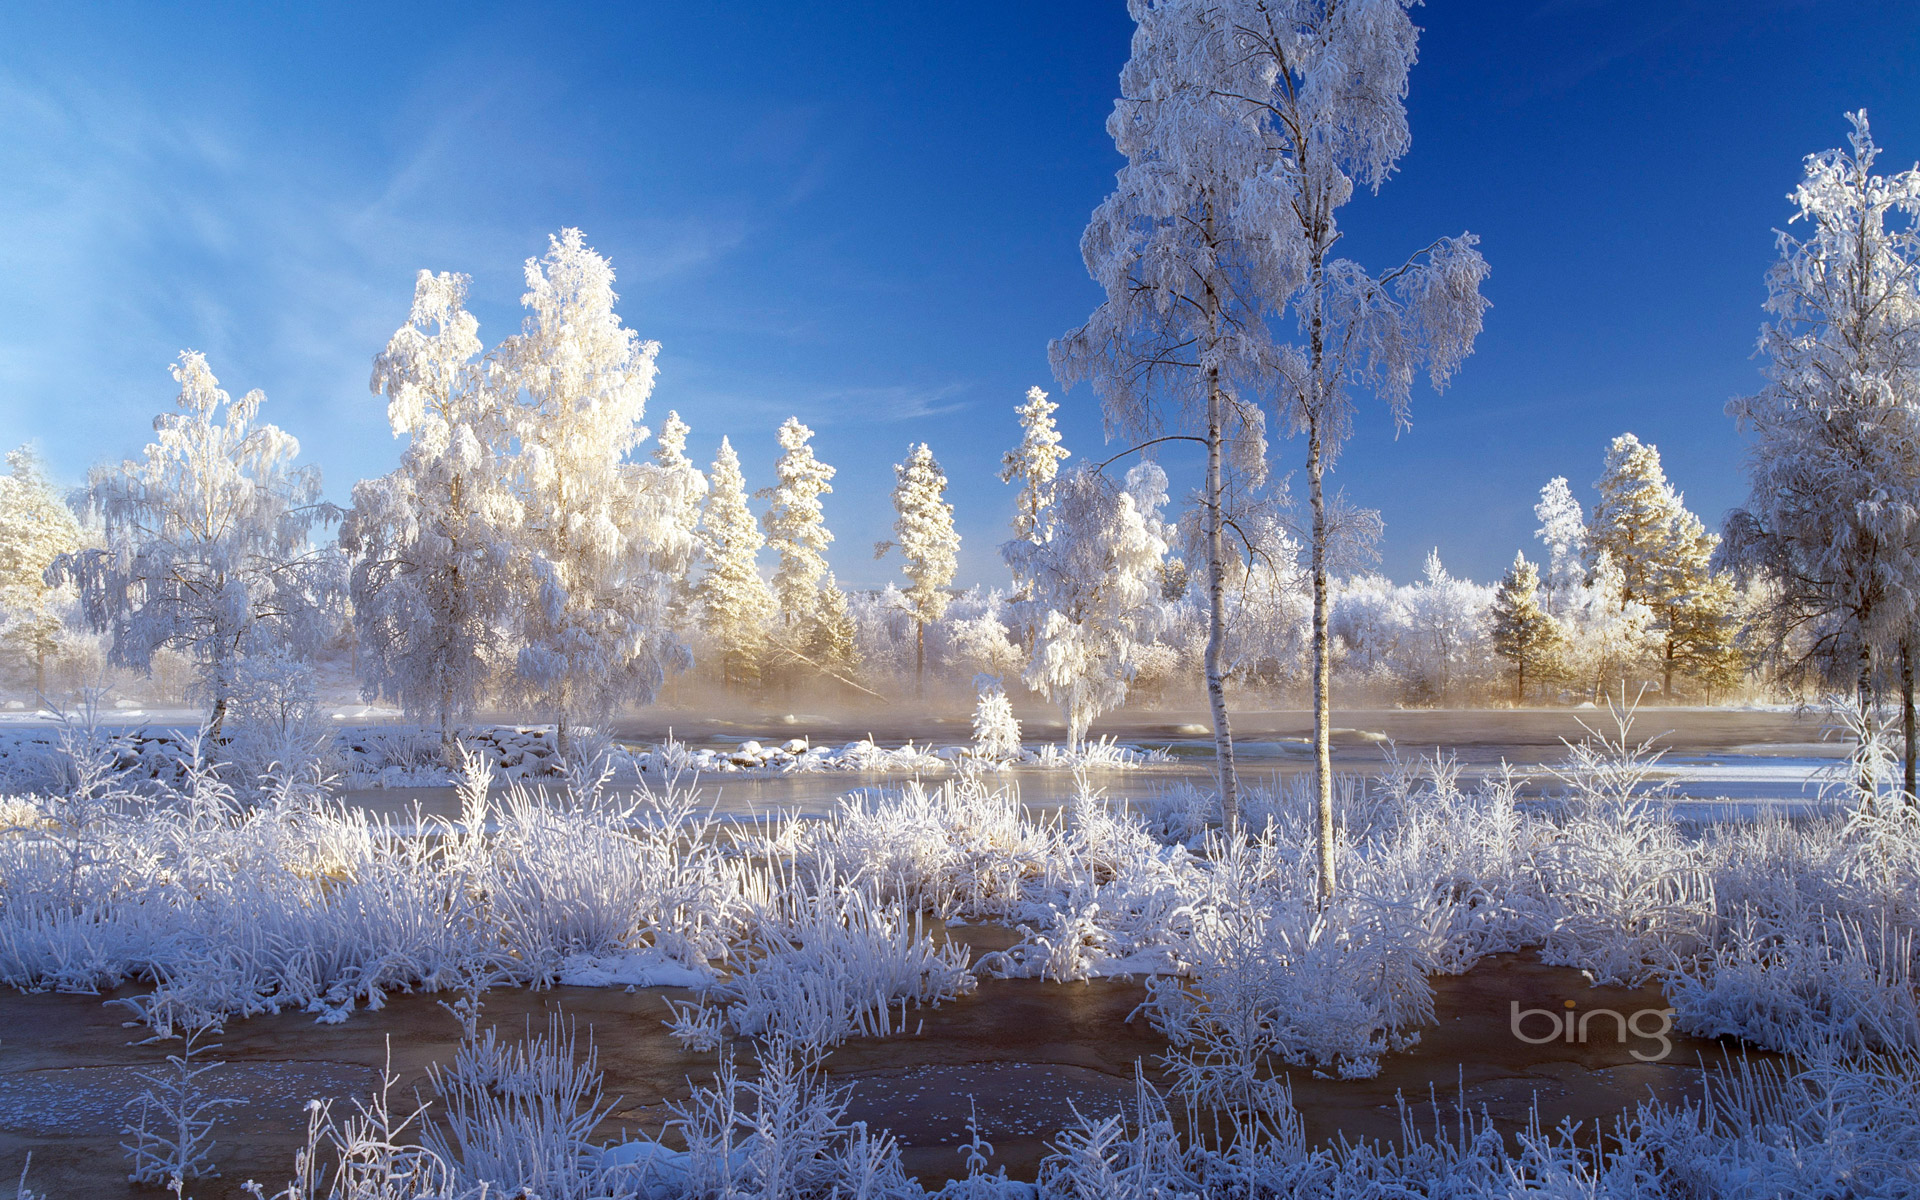 Weekly Bing wallpapers 25 to 31 December 2012   HQ Wallpapers   HQ 1920x1200